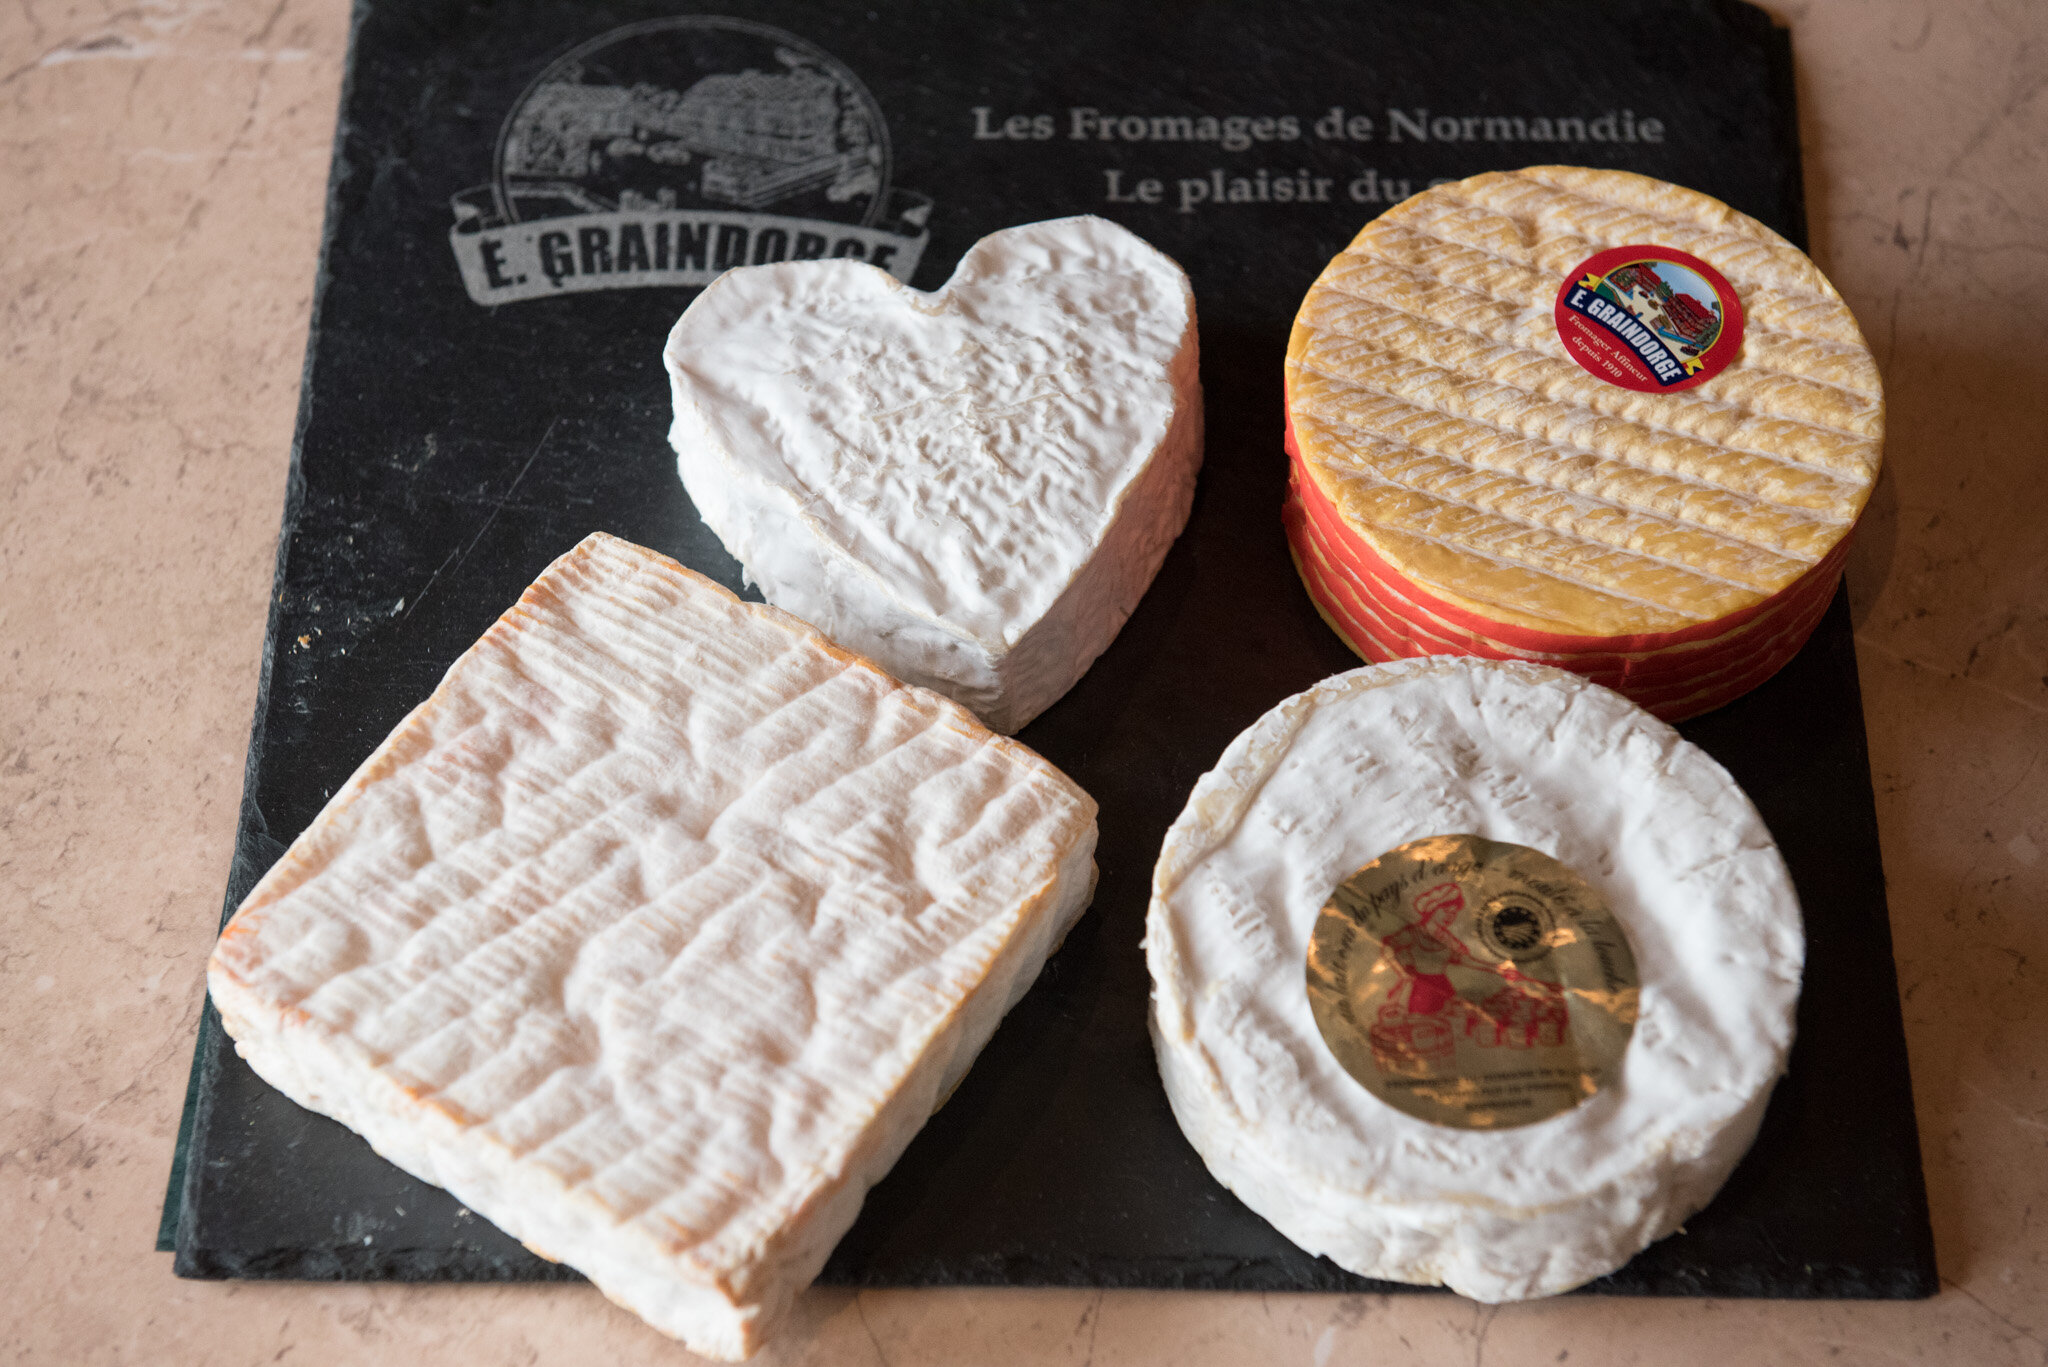    Graindorge cheese for 'Culture' U.S.    Selection of Graindorge cheeses 